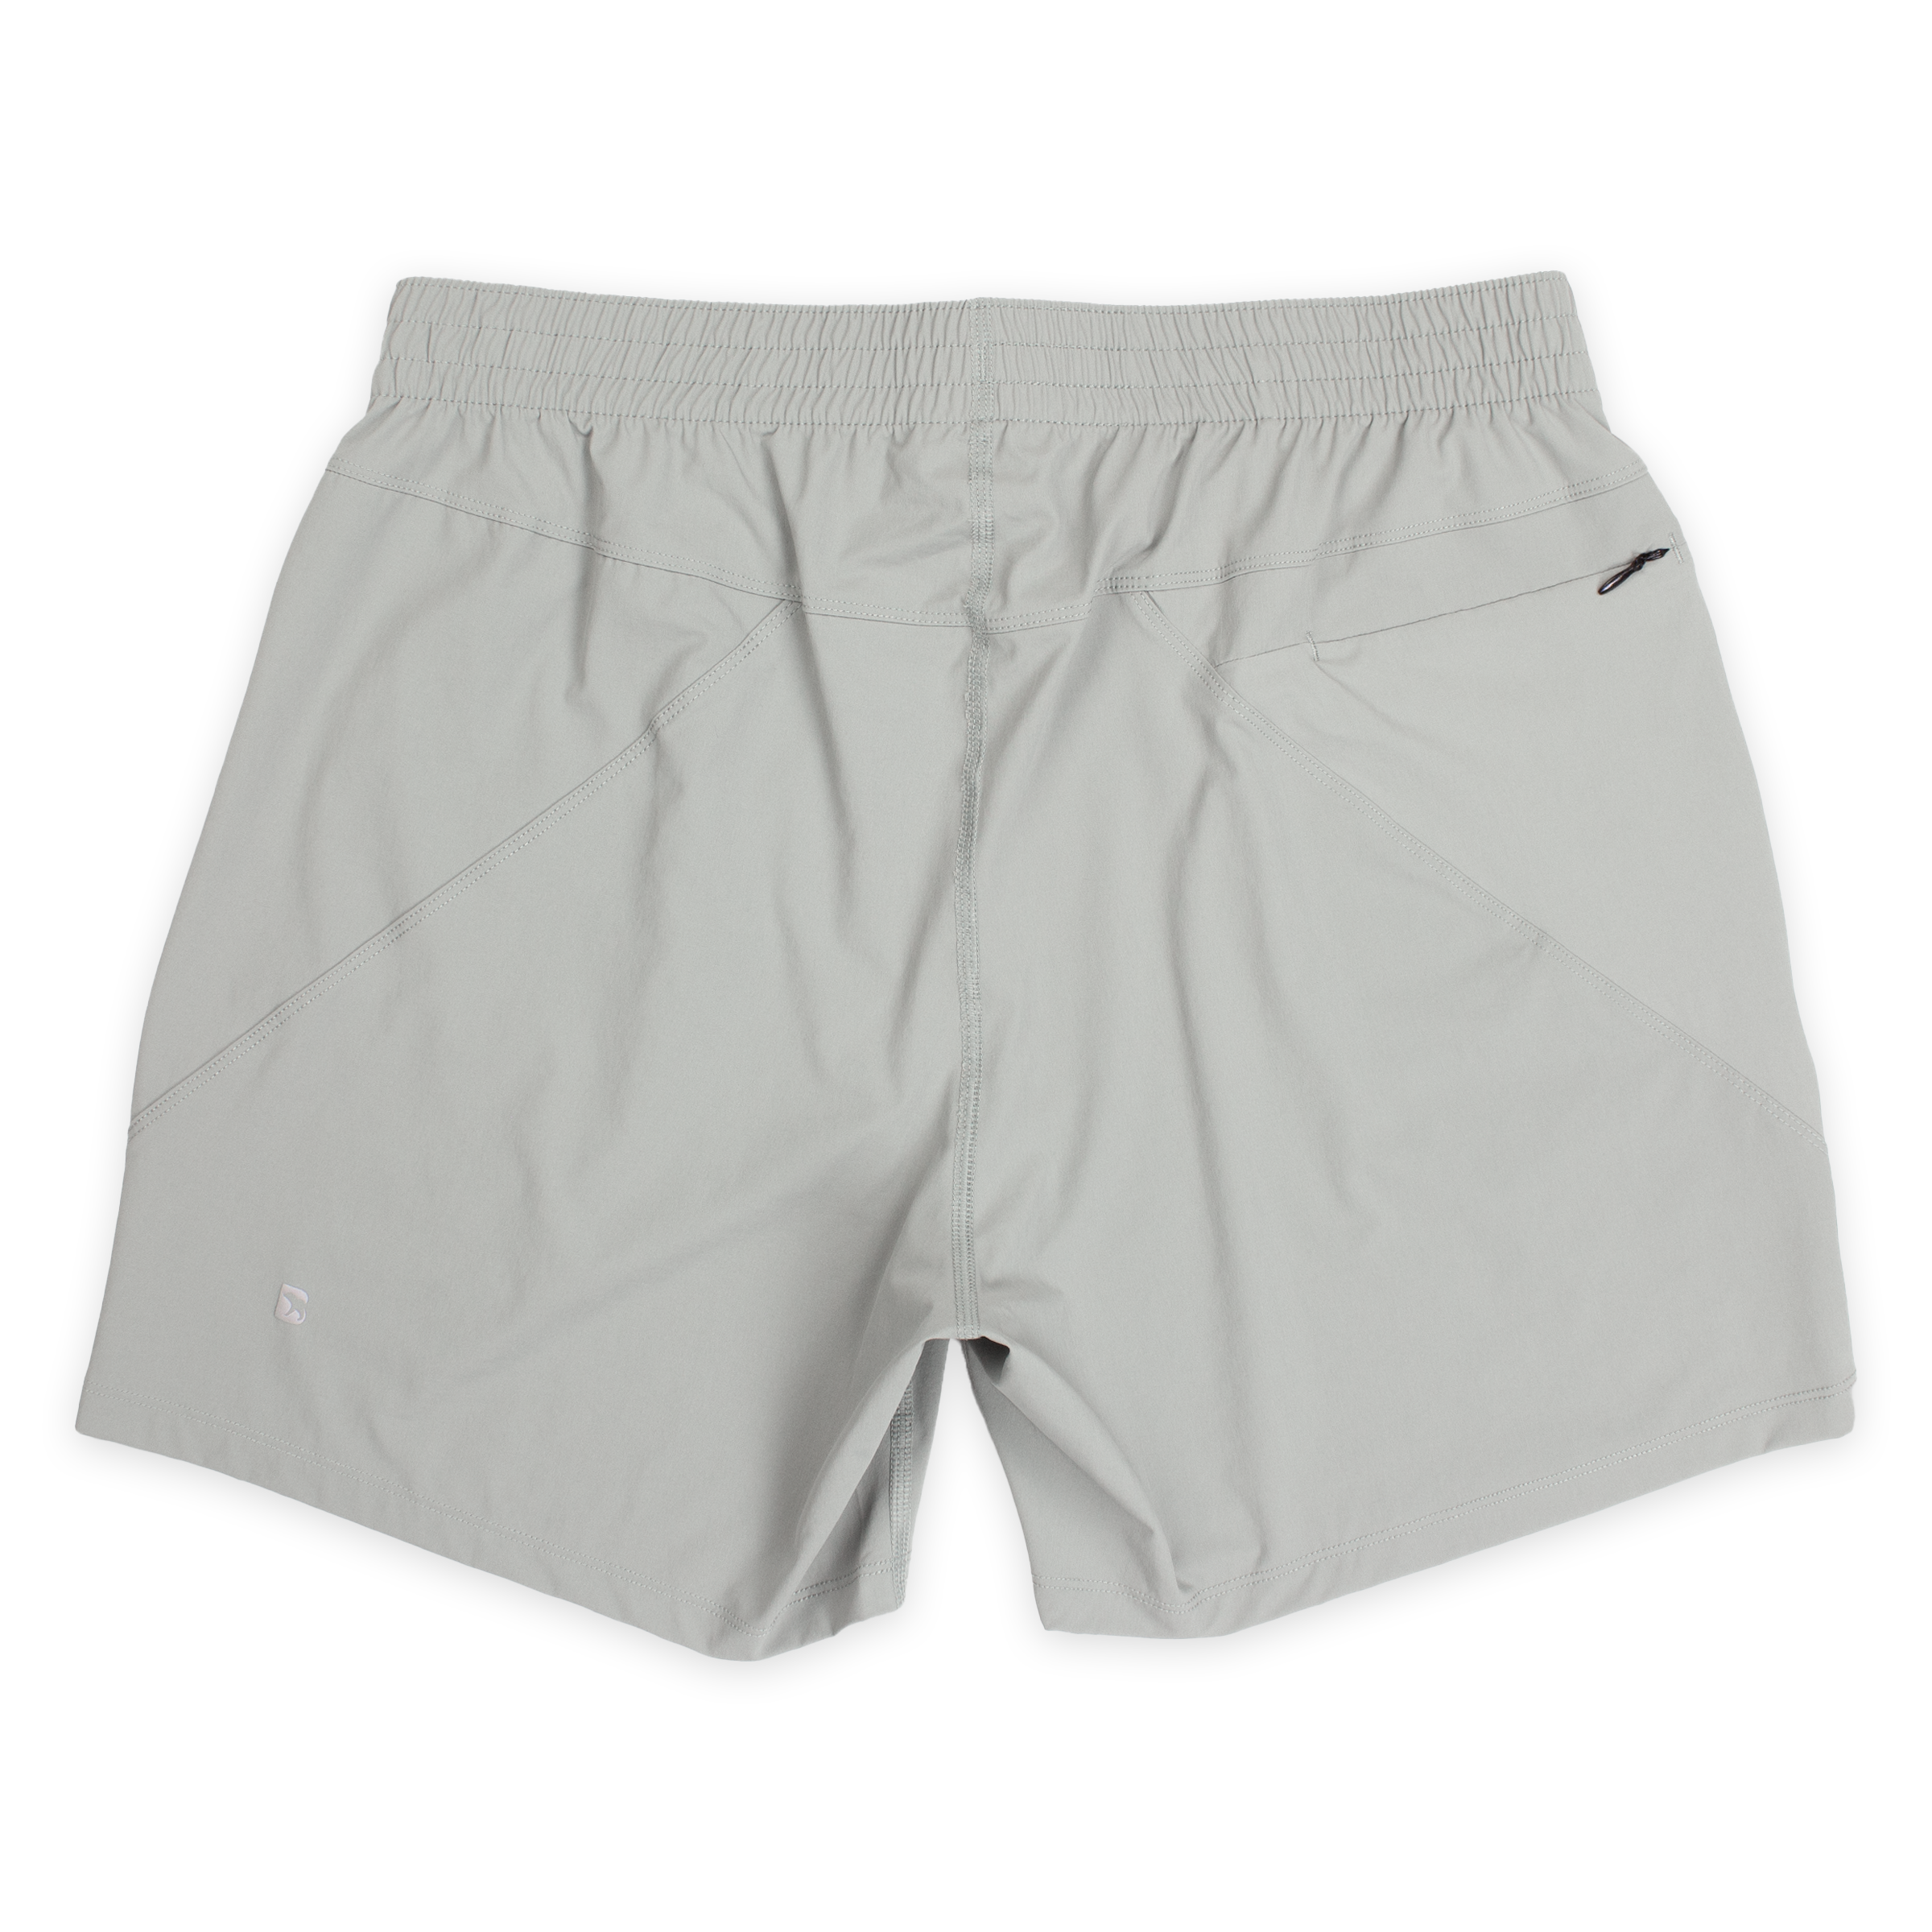 Atlas Short 5.5" Grey back with elastic waistband, back right zippered pocket, and small reflective logo of Bear drawn inside the letter B in bottom left corner